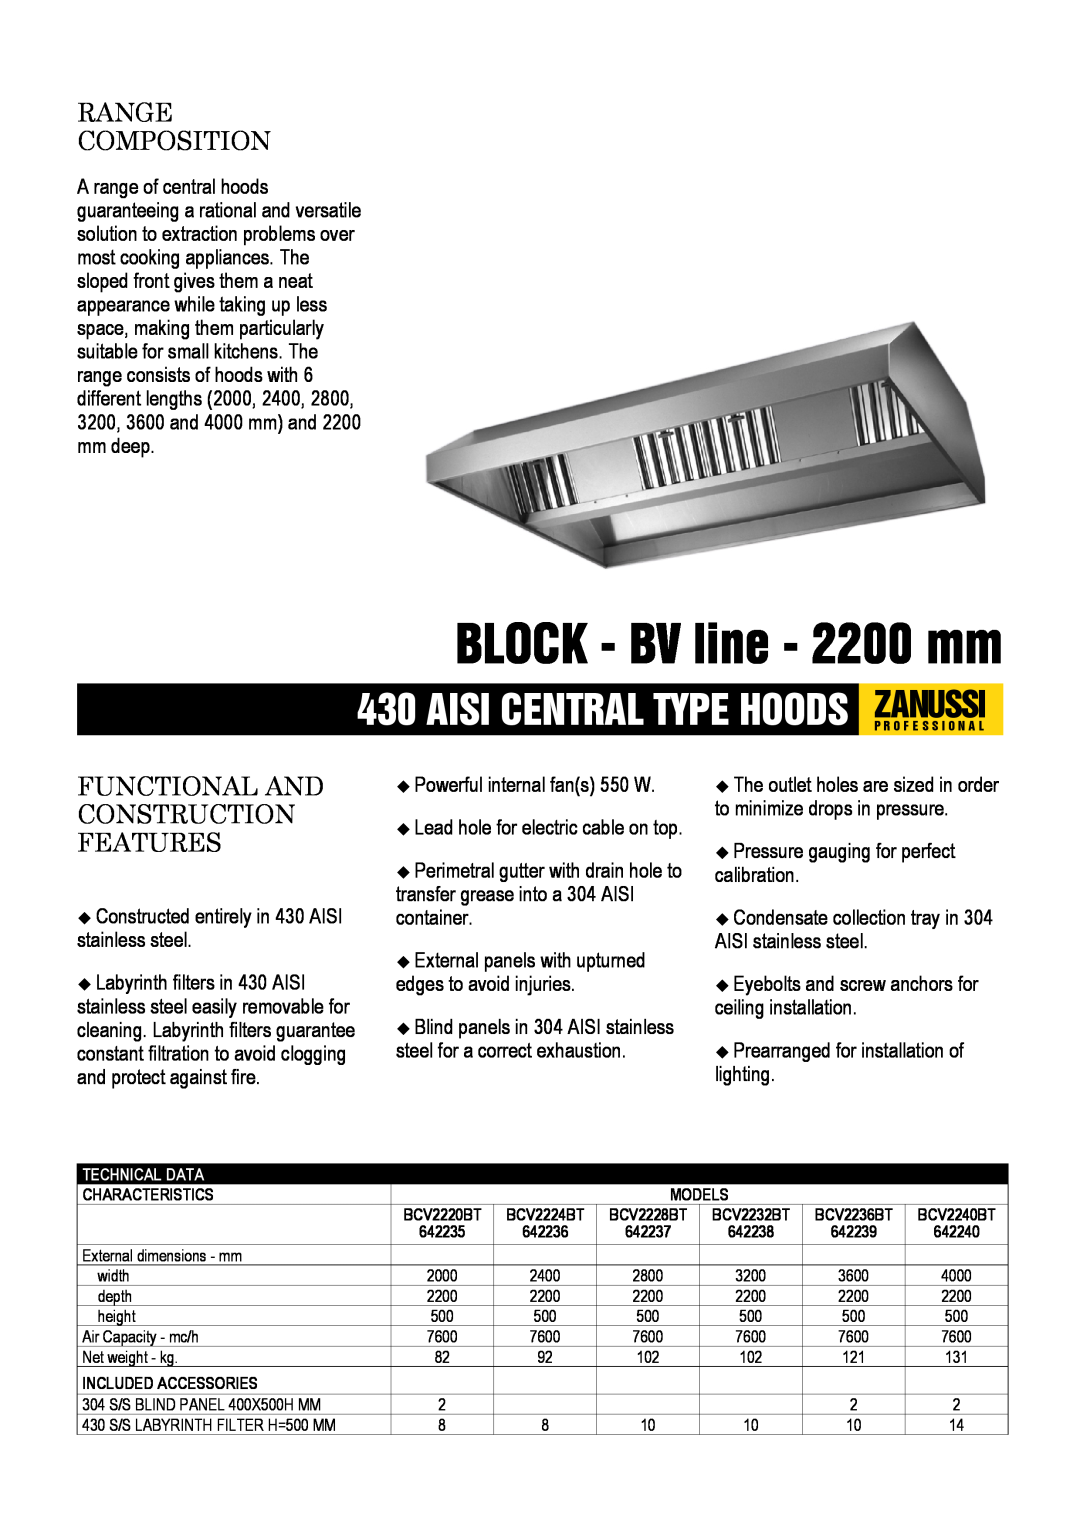 Zanussi 642236, 642235 dimensions BLOCK - BV line - 2200 mm, Range Composition, Functional And Construction Features 